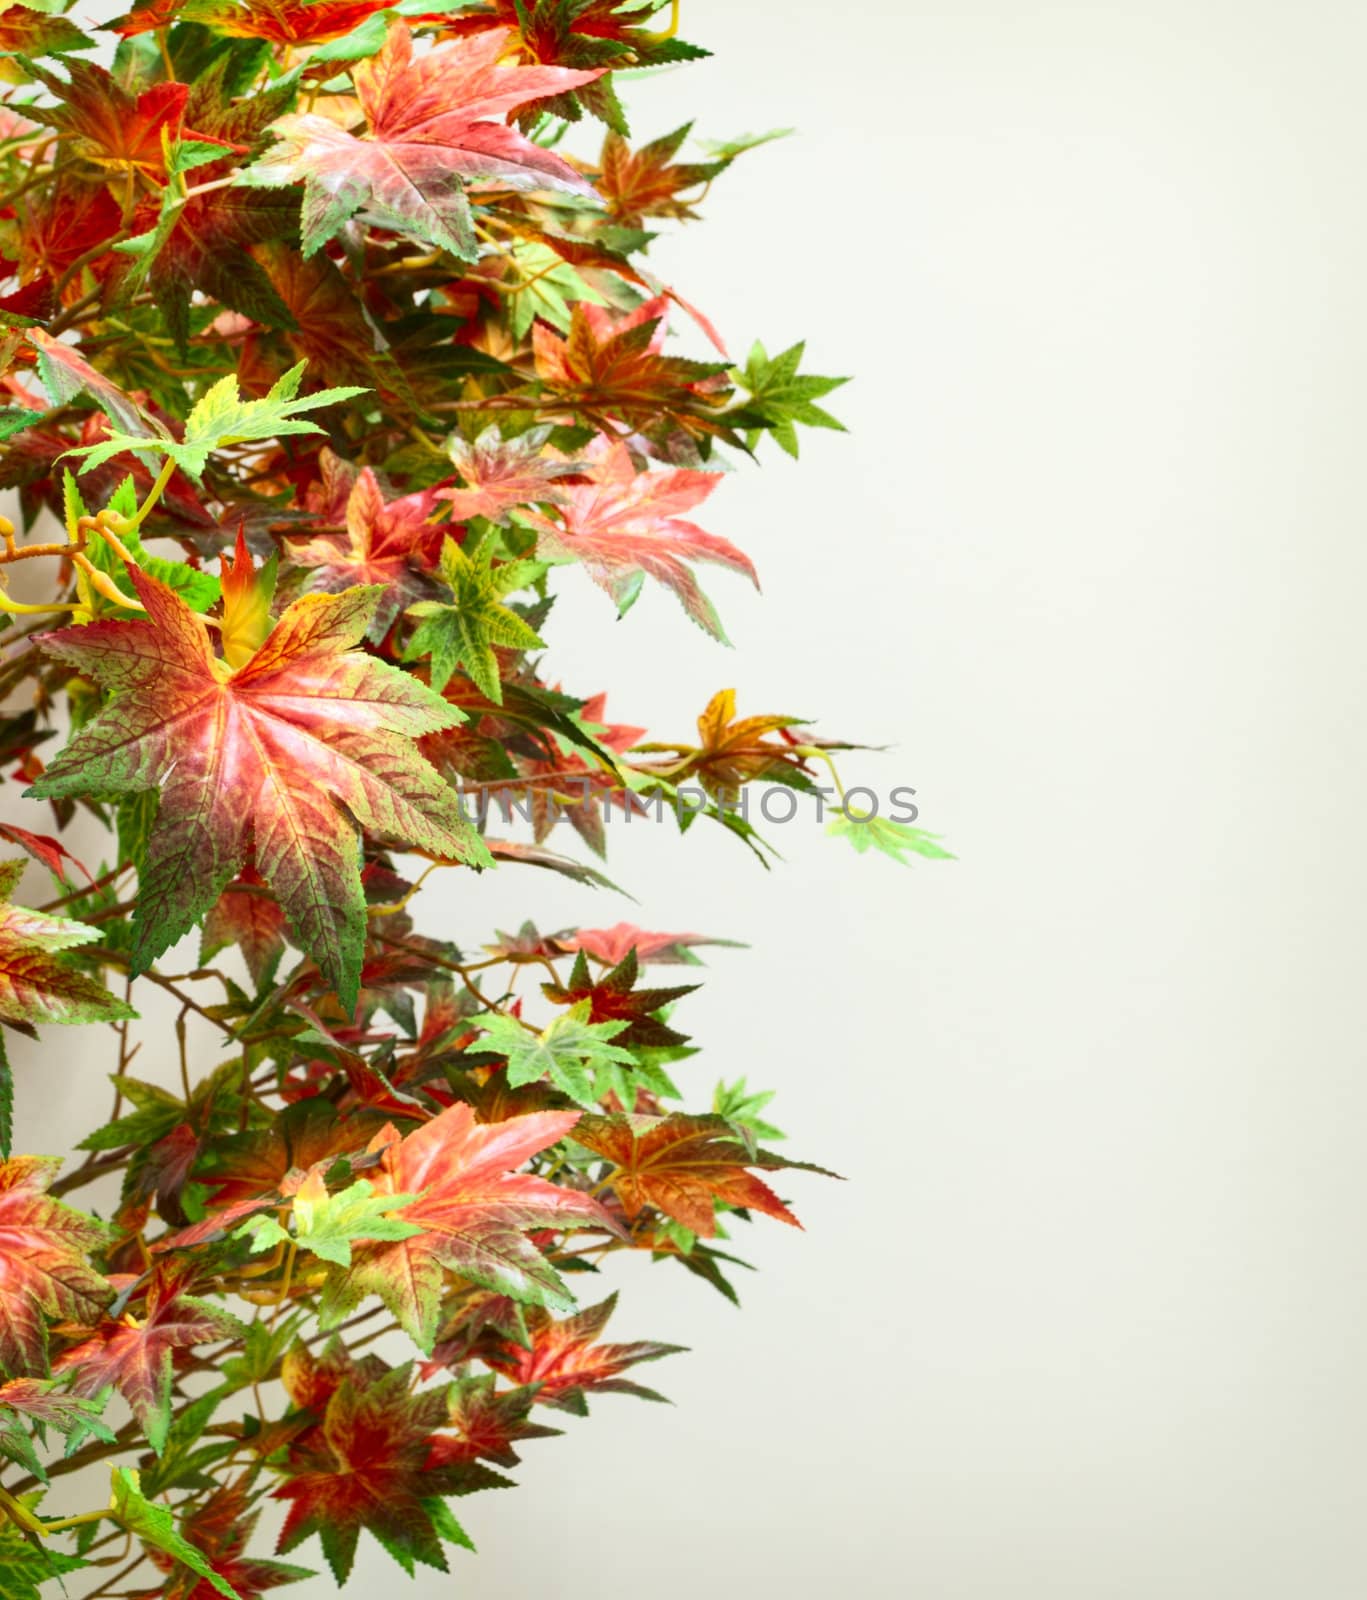 Reddish colored artificial maple leaves and bright wall at the background